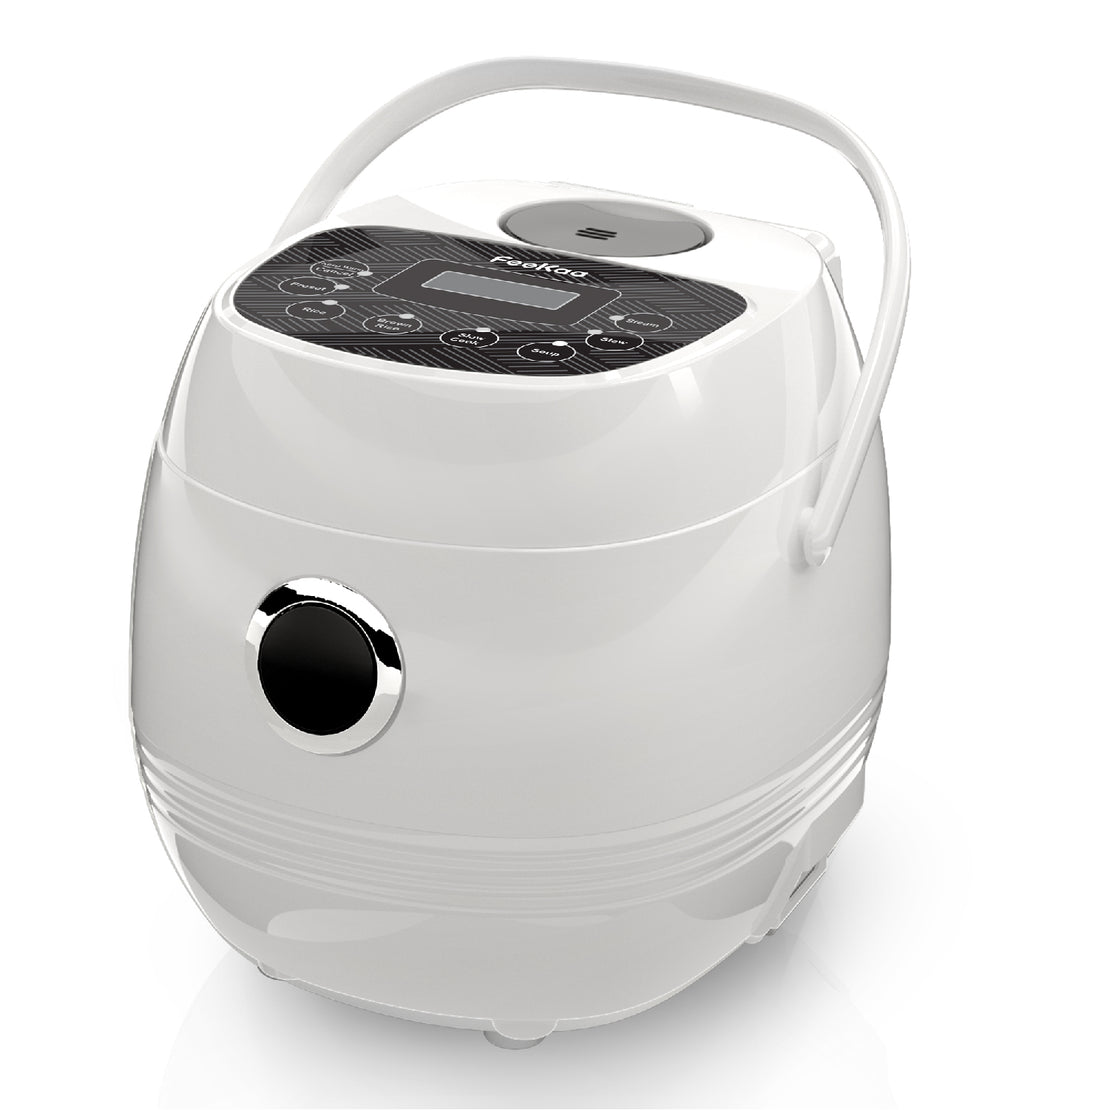 Mini Rice Cooker Small 4-Cup (cooked), Travel Rice Maker, 6-in-1 Portable Rice Cooker' 2 Cup (uncooked), Slow Cooker, Soup Maker, Stew Pot, White